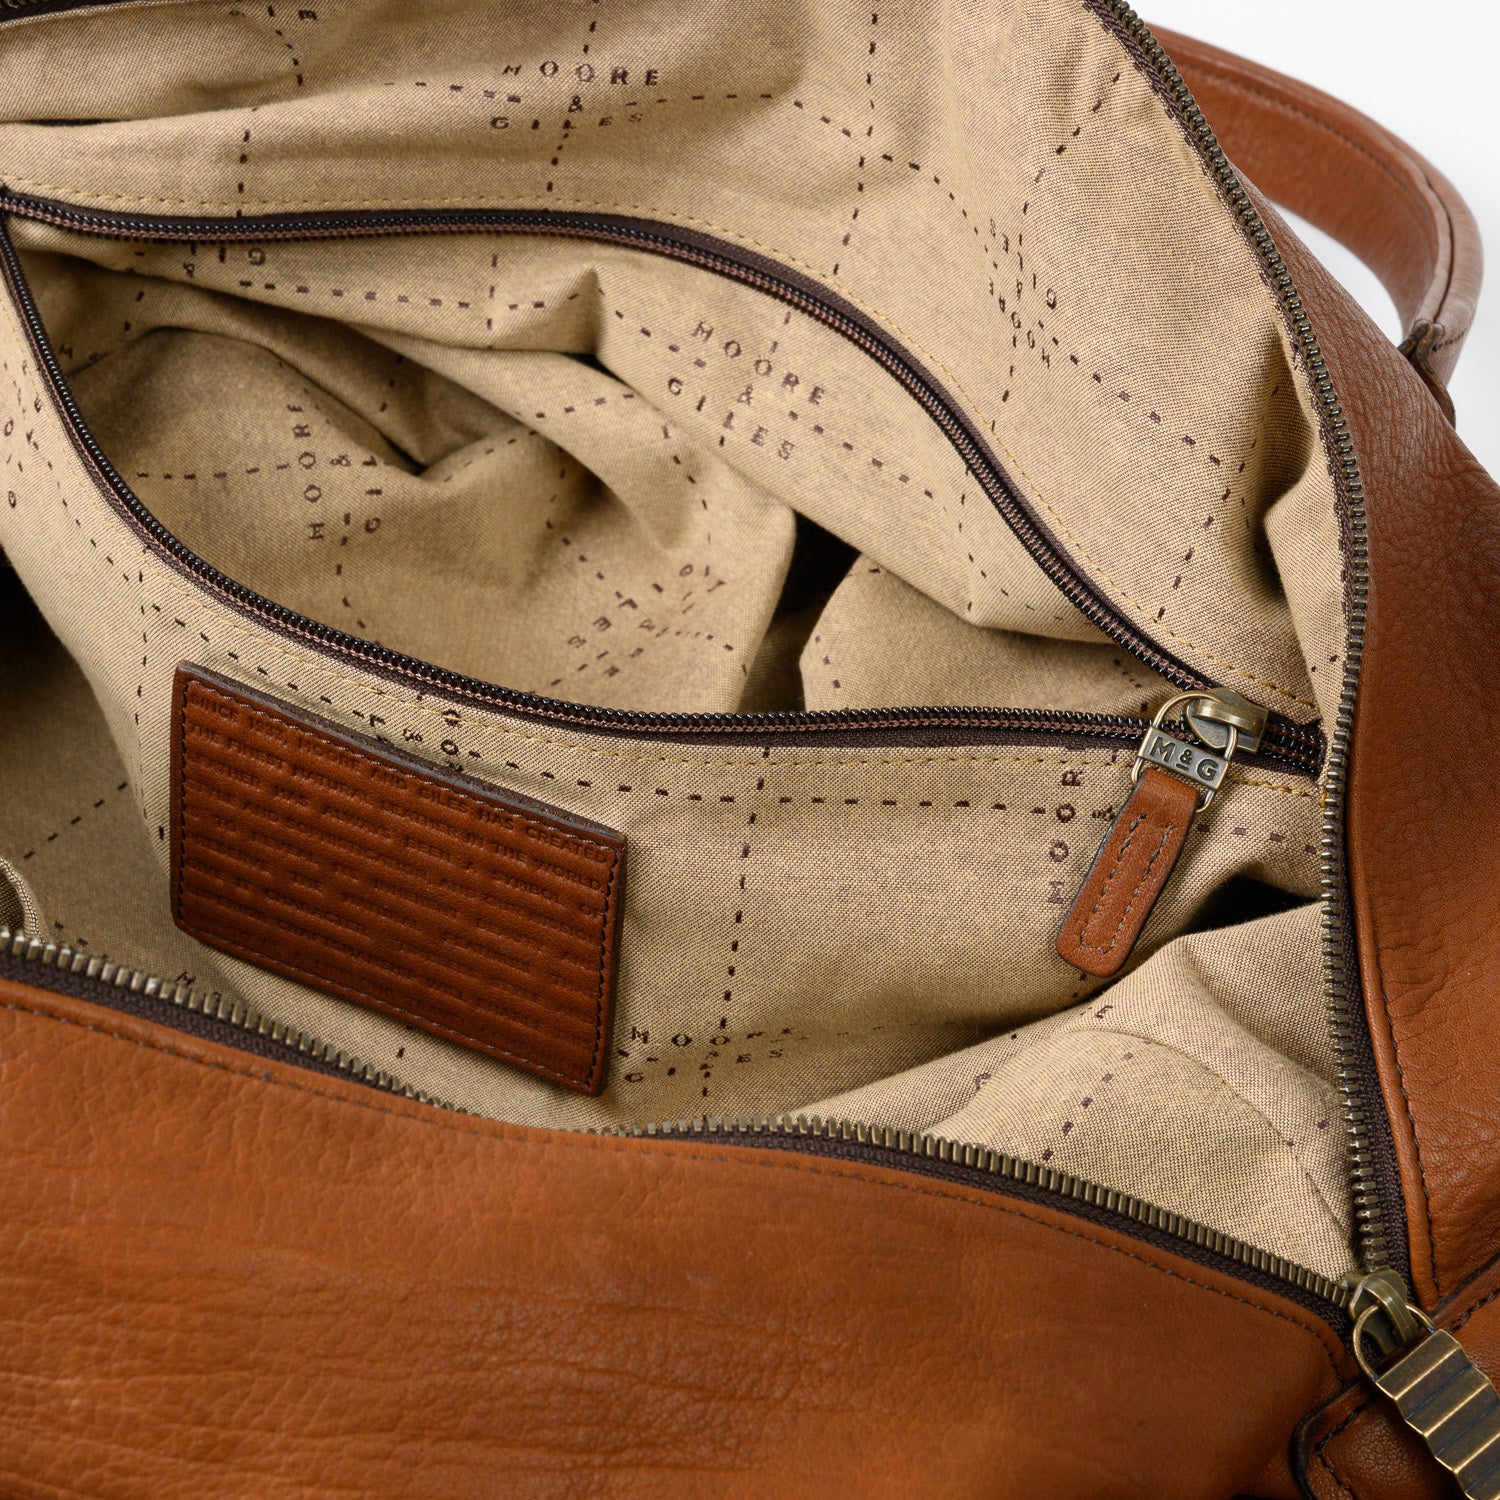 Benedict Leather Weekend Bag in Seven Hills Umber by Moore & Giles